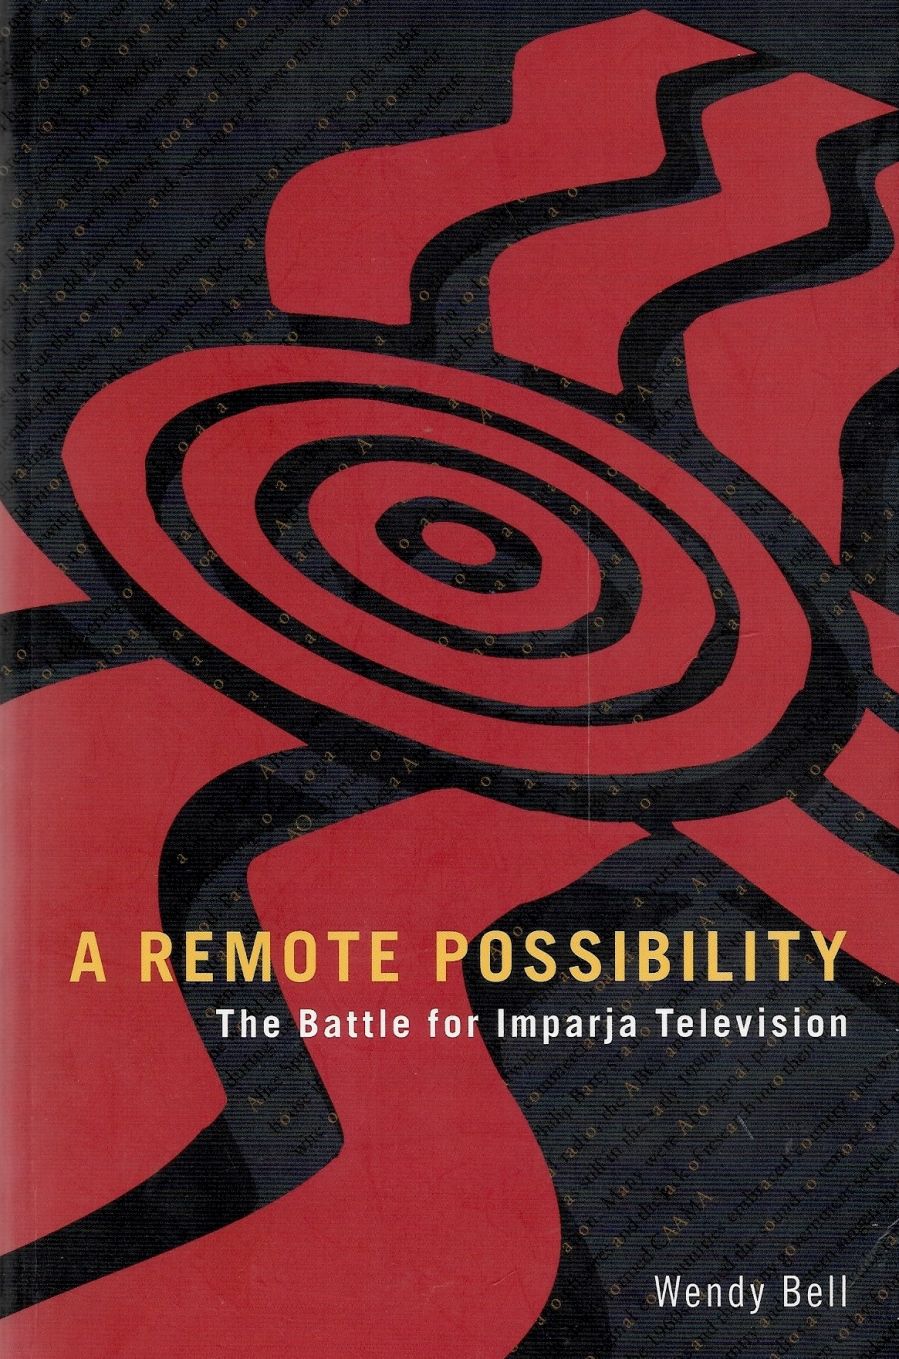 Red and white front cover for book, with yellow writing - A Remote Possibilty, the battle for Imparja Television.